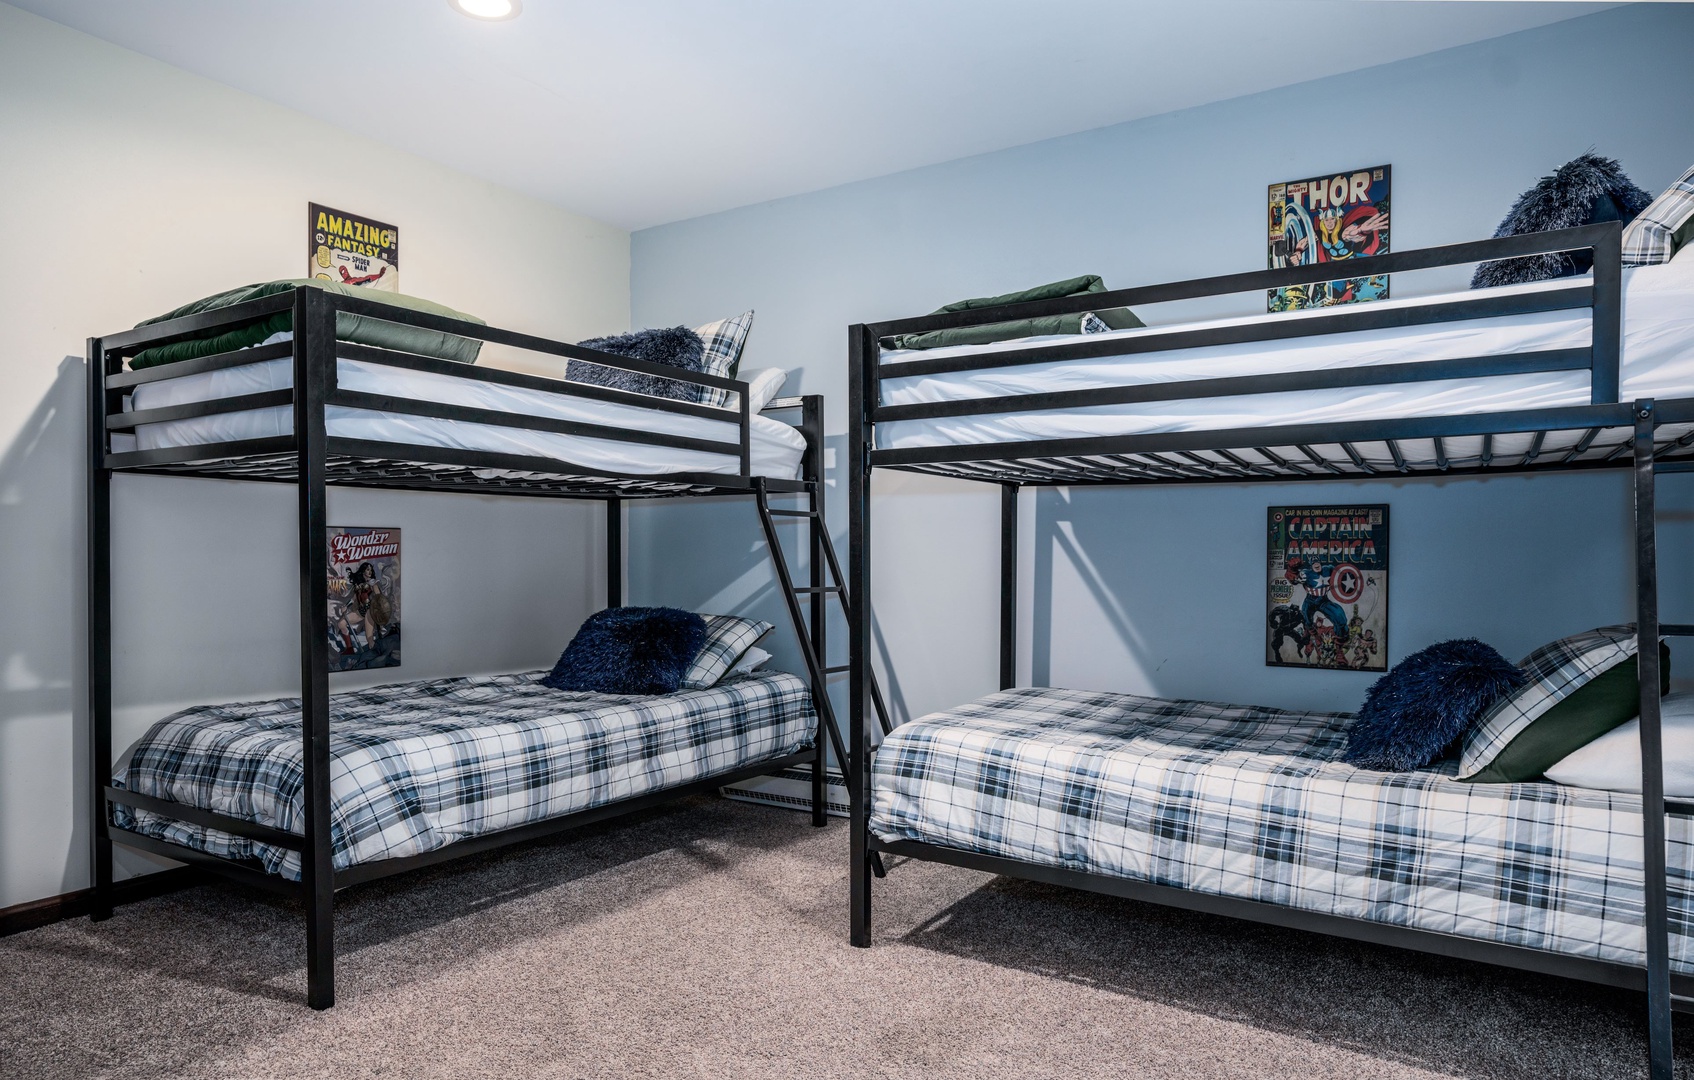 The final bedroom includes 2 twin-over-twin bunkbeds and a Smart TV